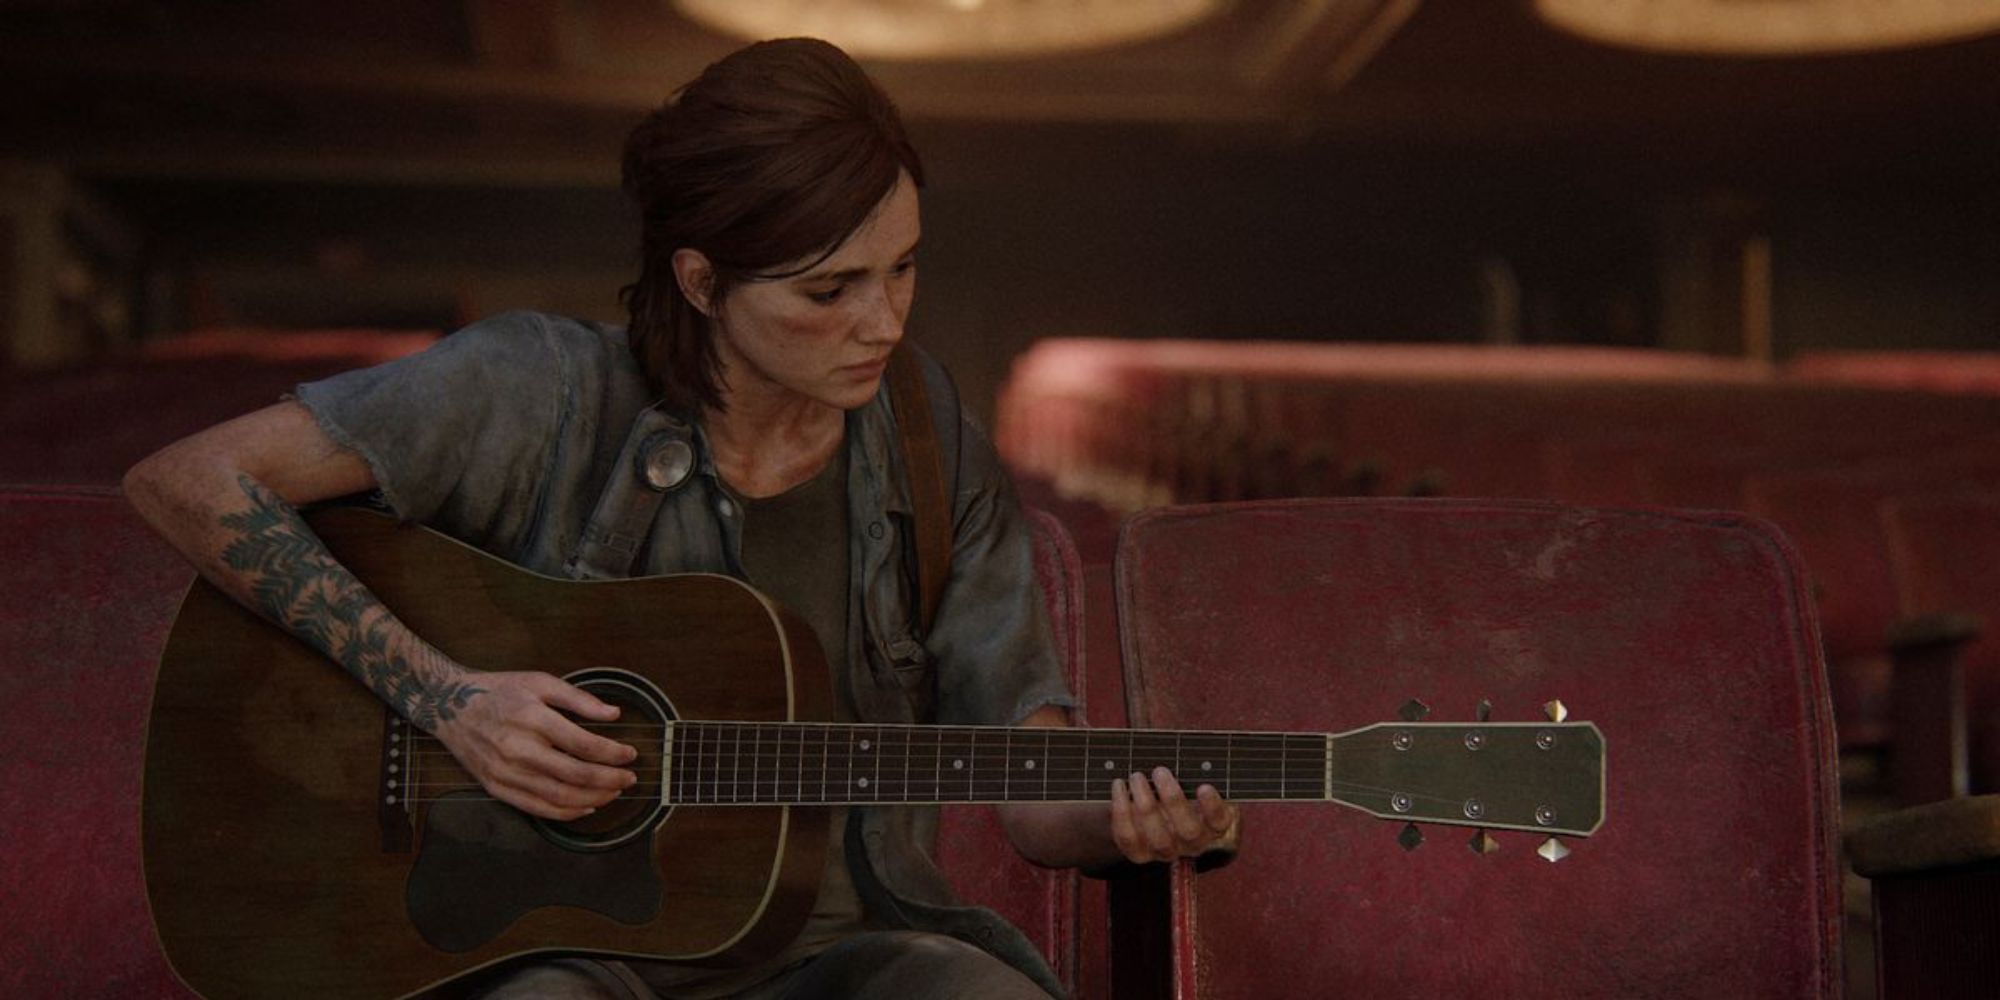 Ellie playing the guitar in The Last of Us Part 2.